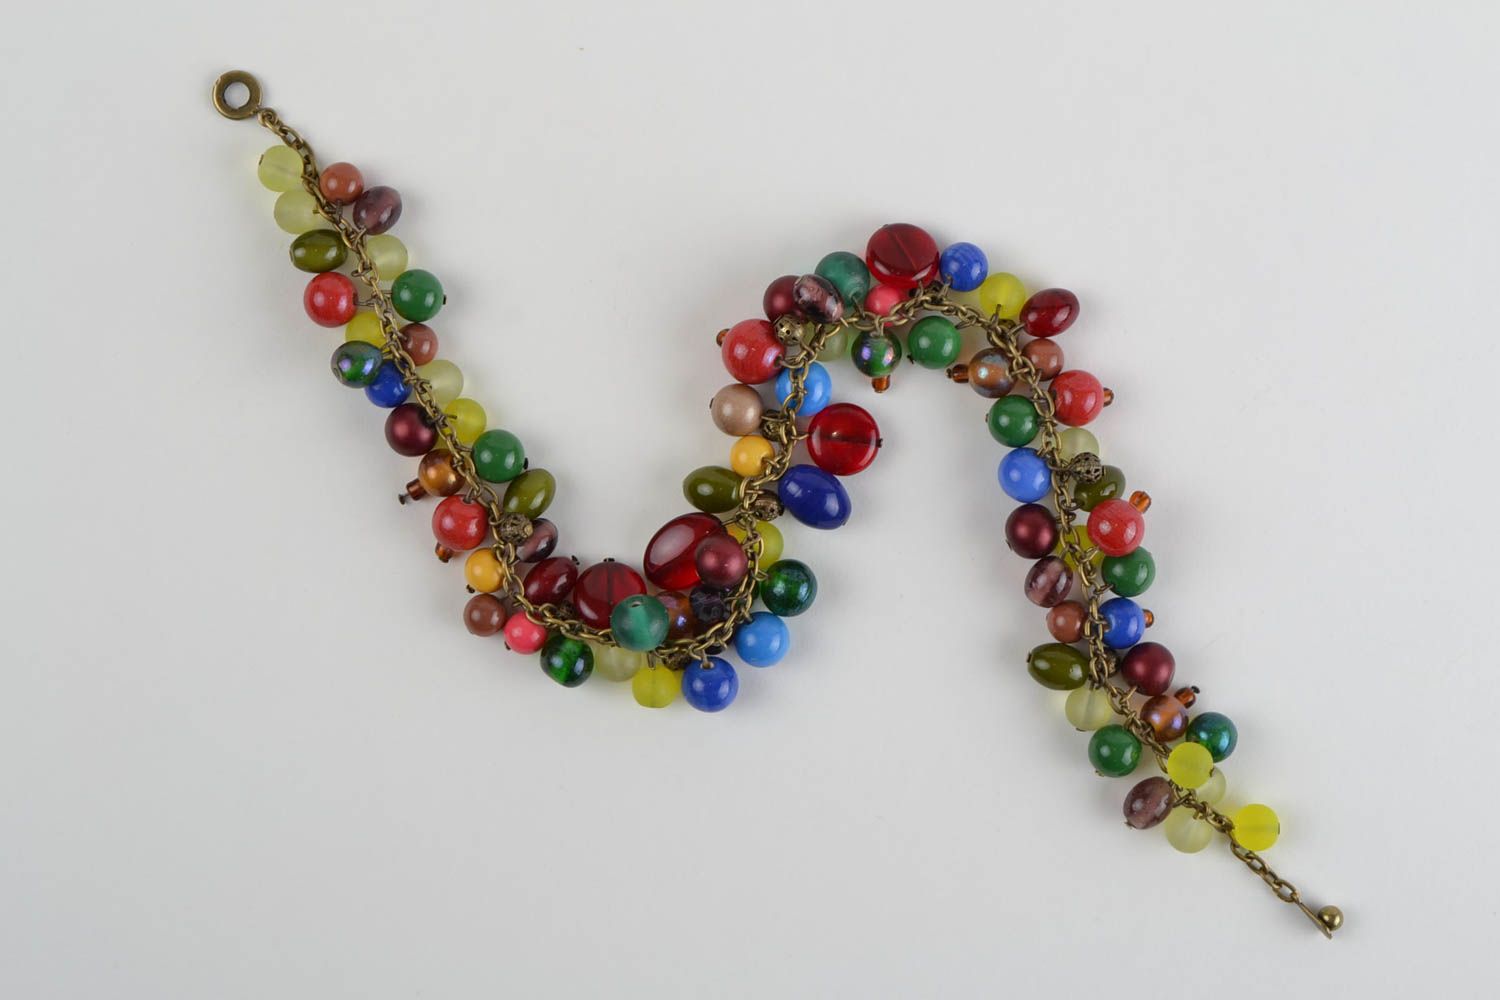 Handmade metal chain designer necklace with colorful glass beads for women photo 3